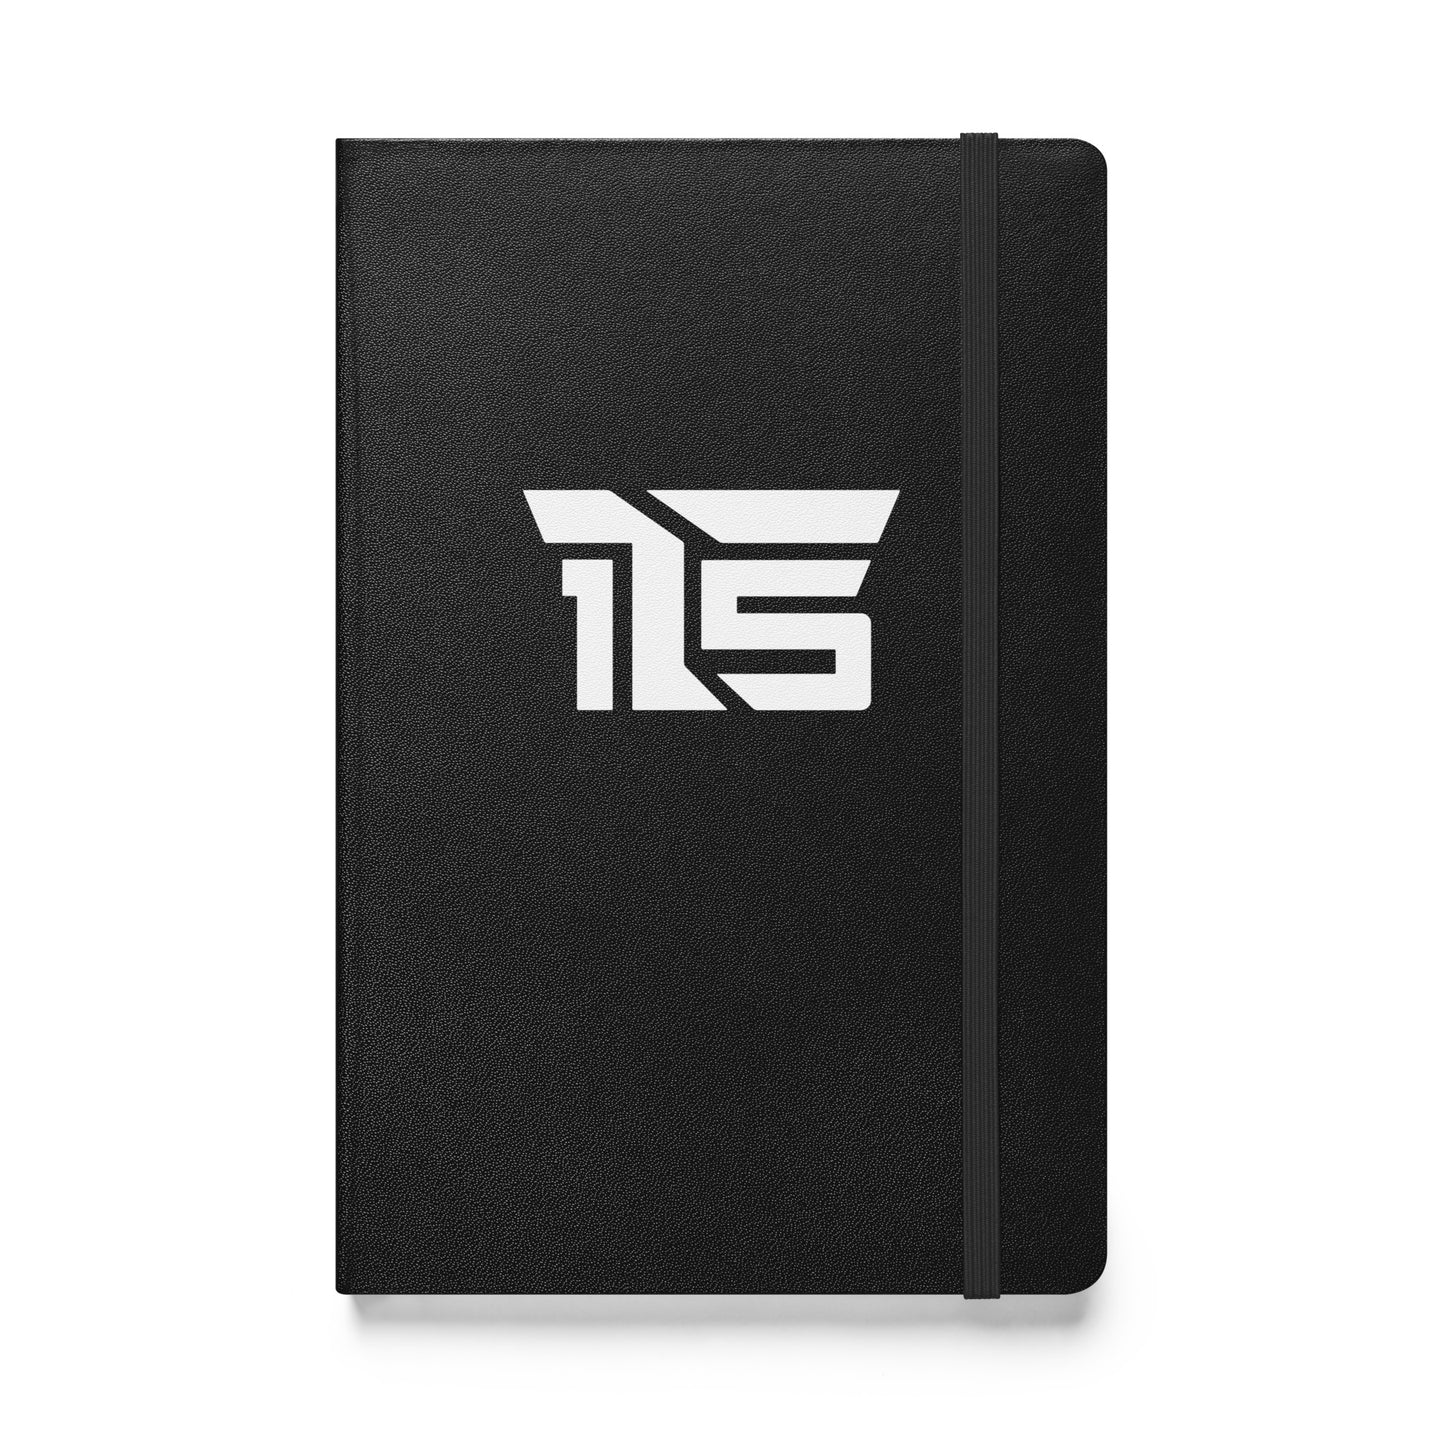 Document your mission, 15 Tango Hardcover Notebook